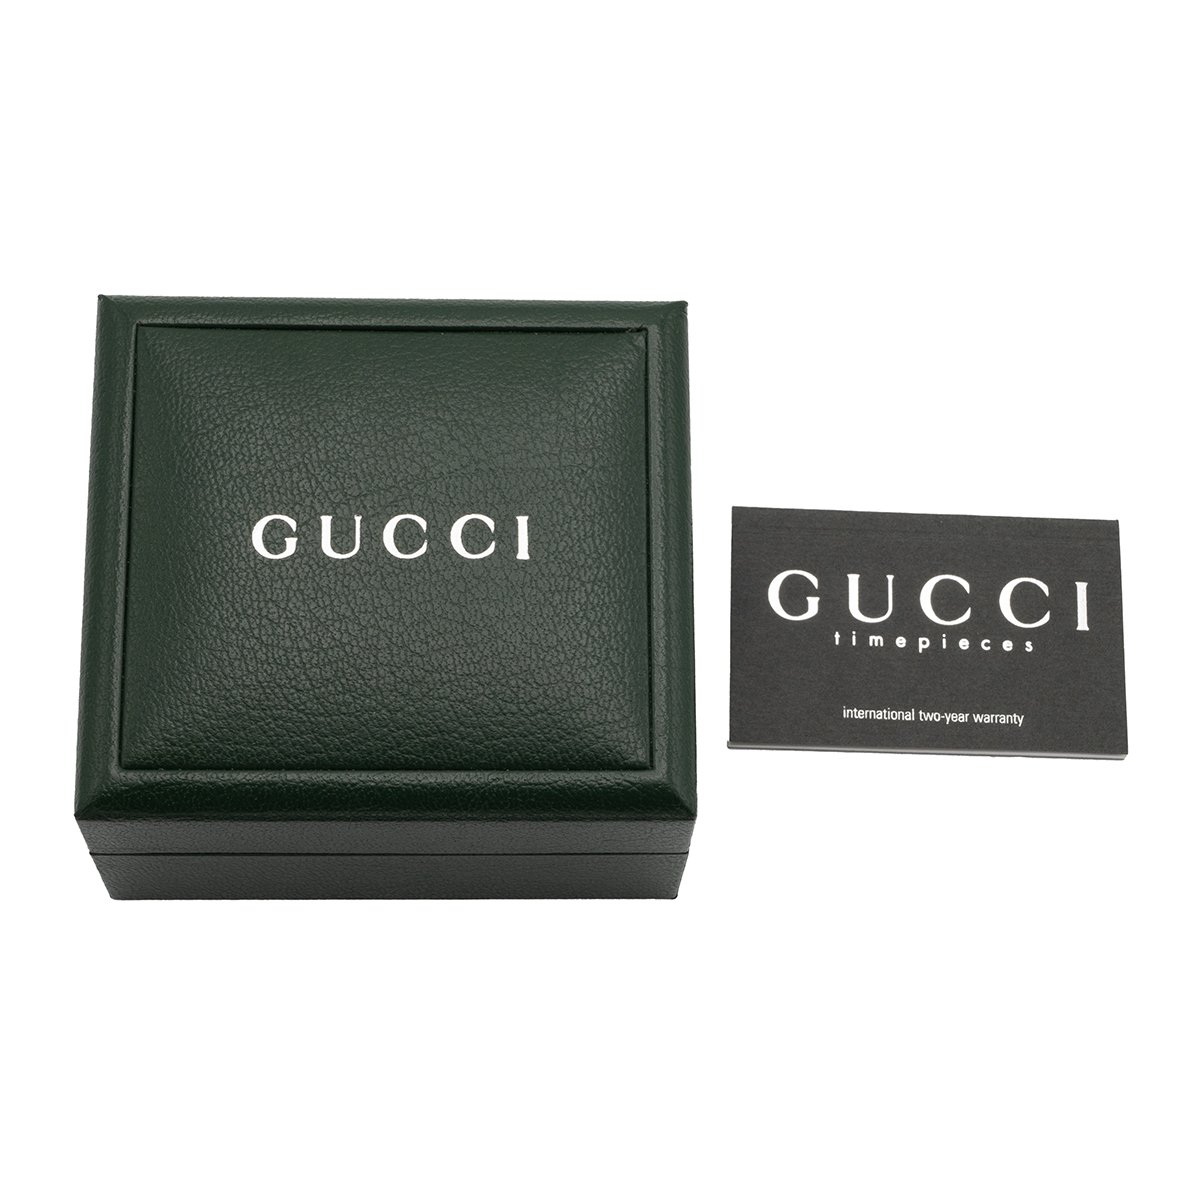 Gucci change bezel gold plated wrist watch with white dial, model 1100L in green leather box, wit... - Image 3 of 5